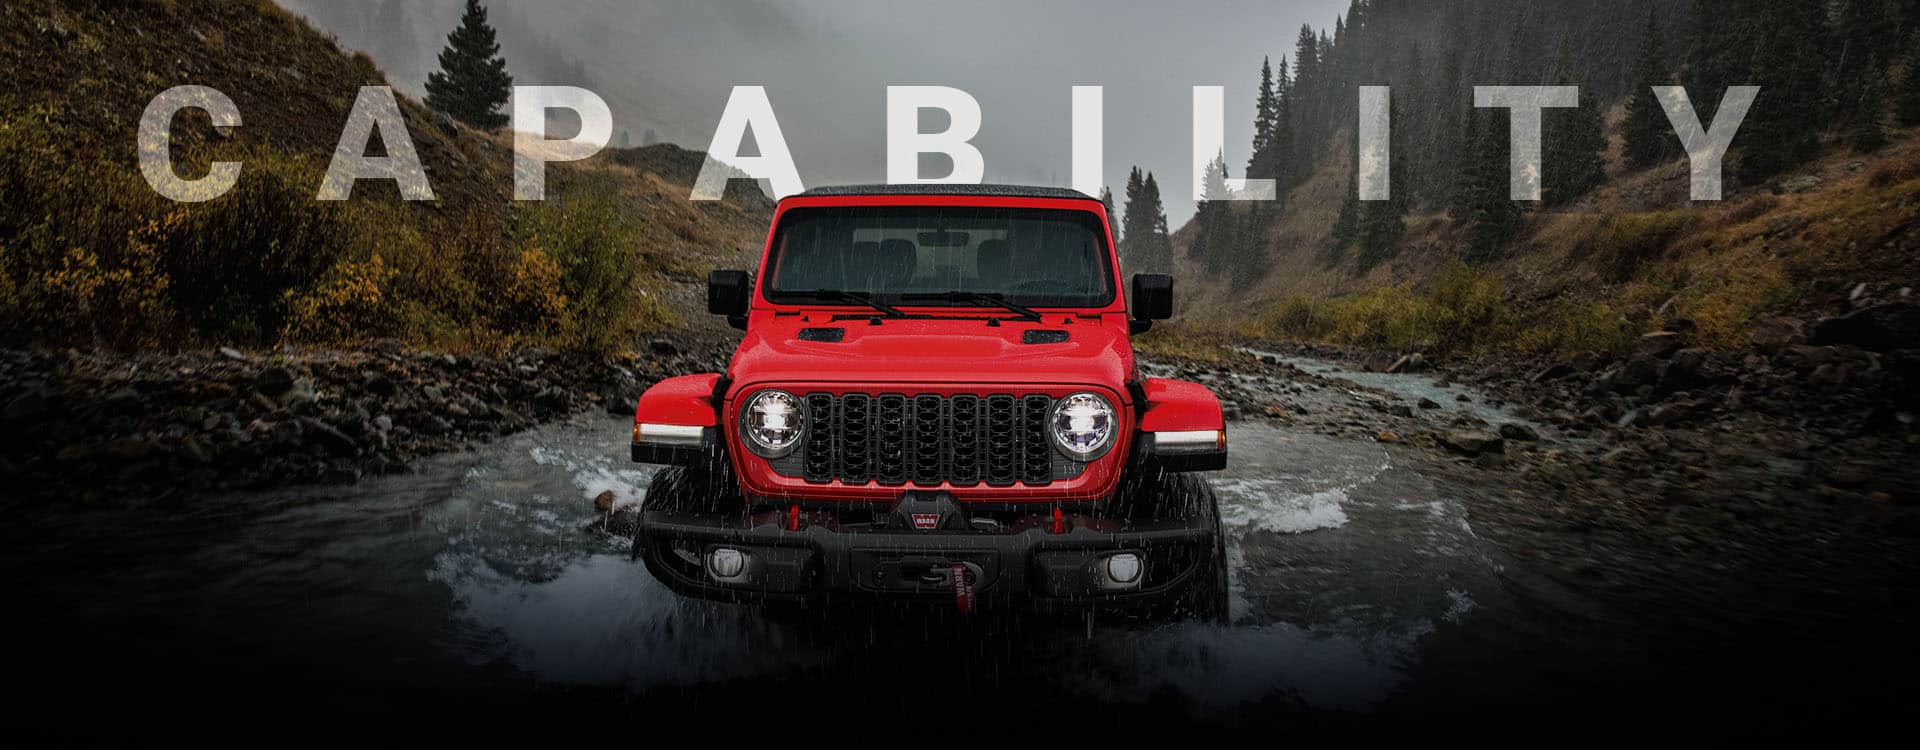 2024 Jeep® Wrangler 4x4 Capability - Off-Road Excellence